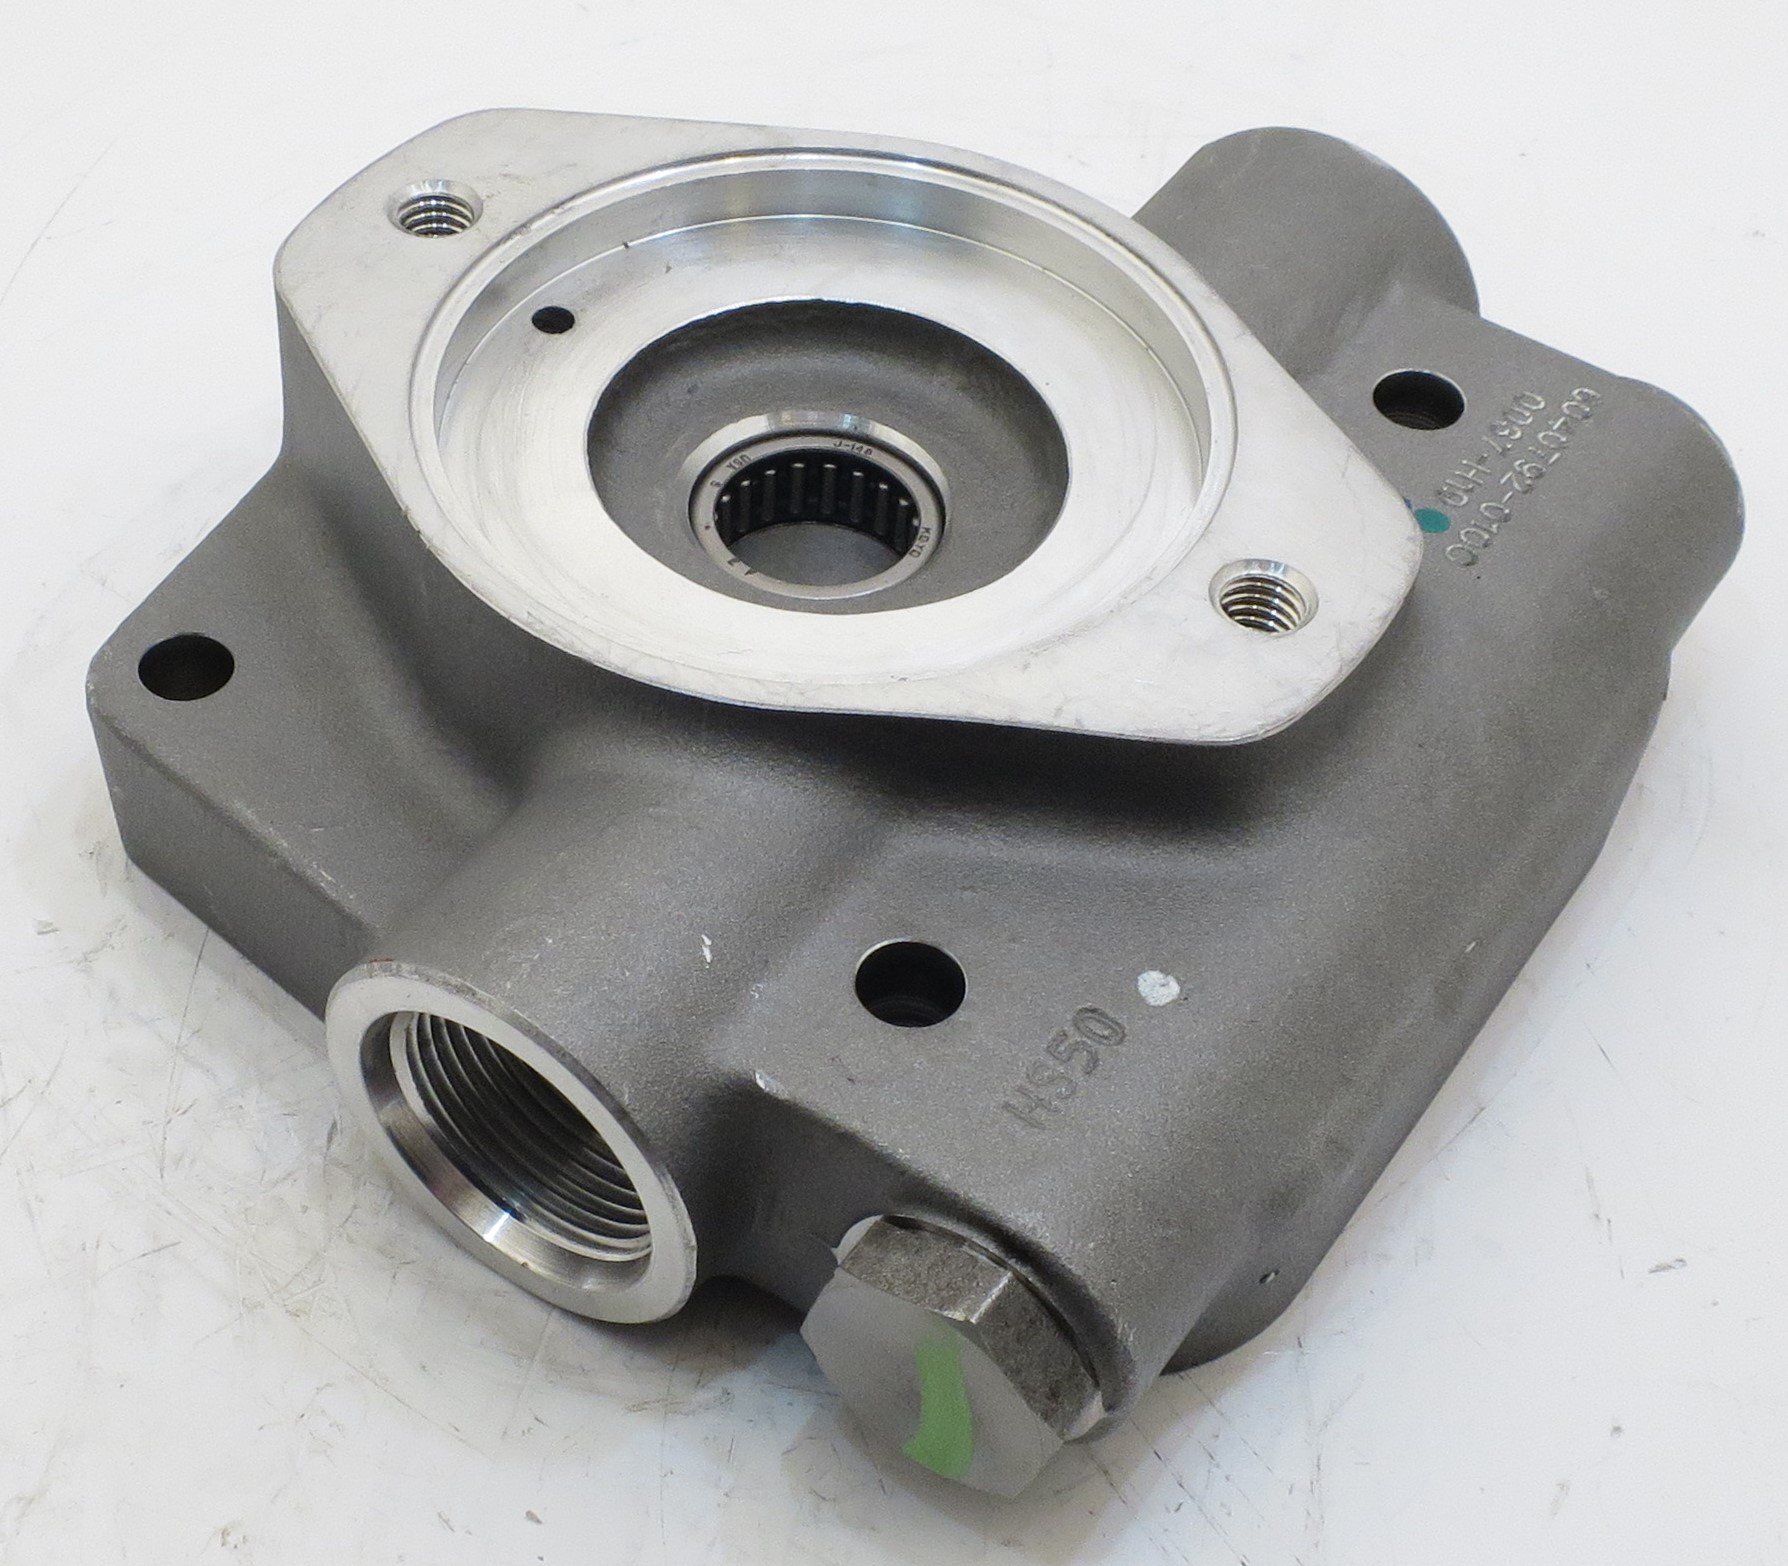 CESSNA 72400 CHARGE PUMP HOUSING